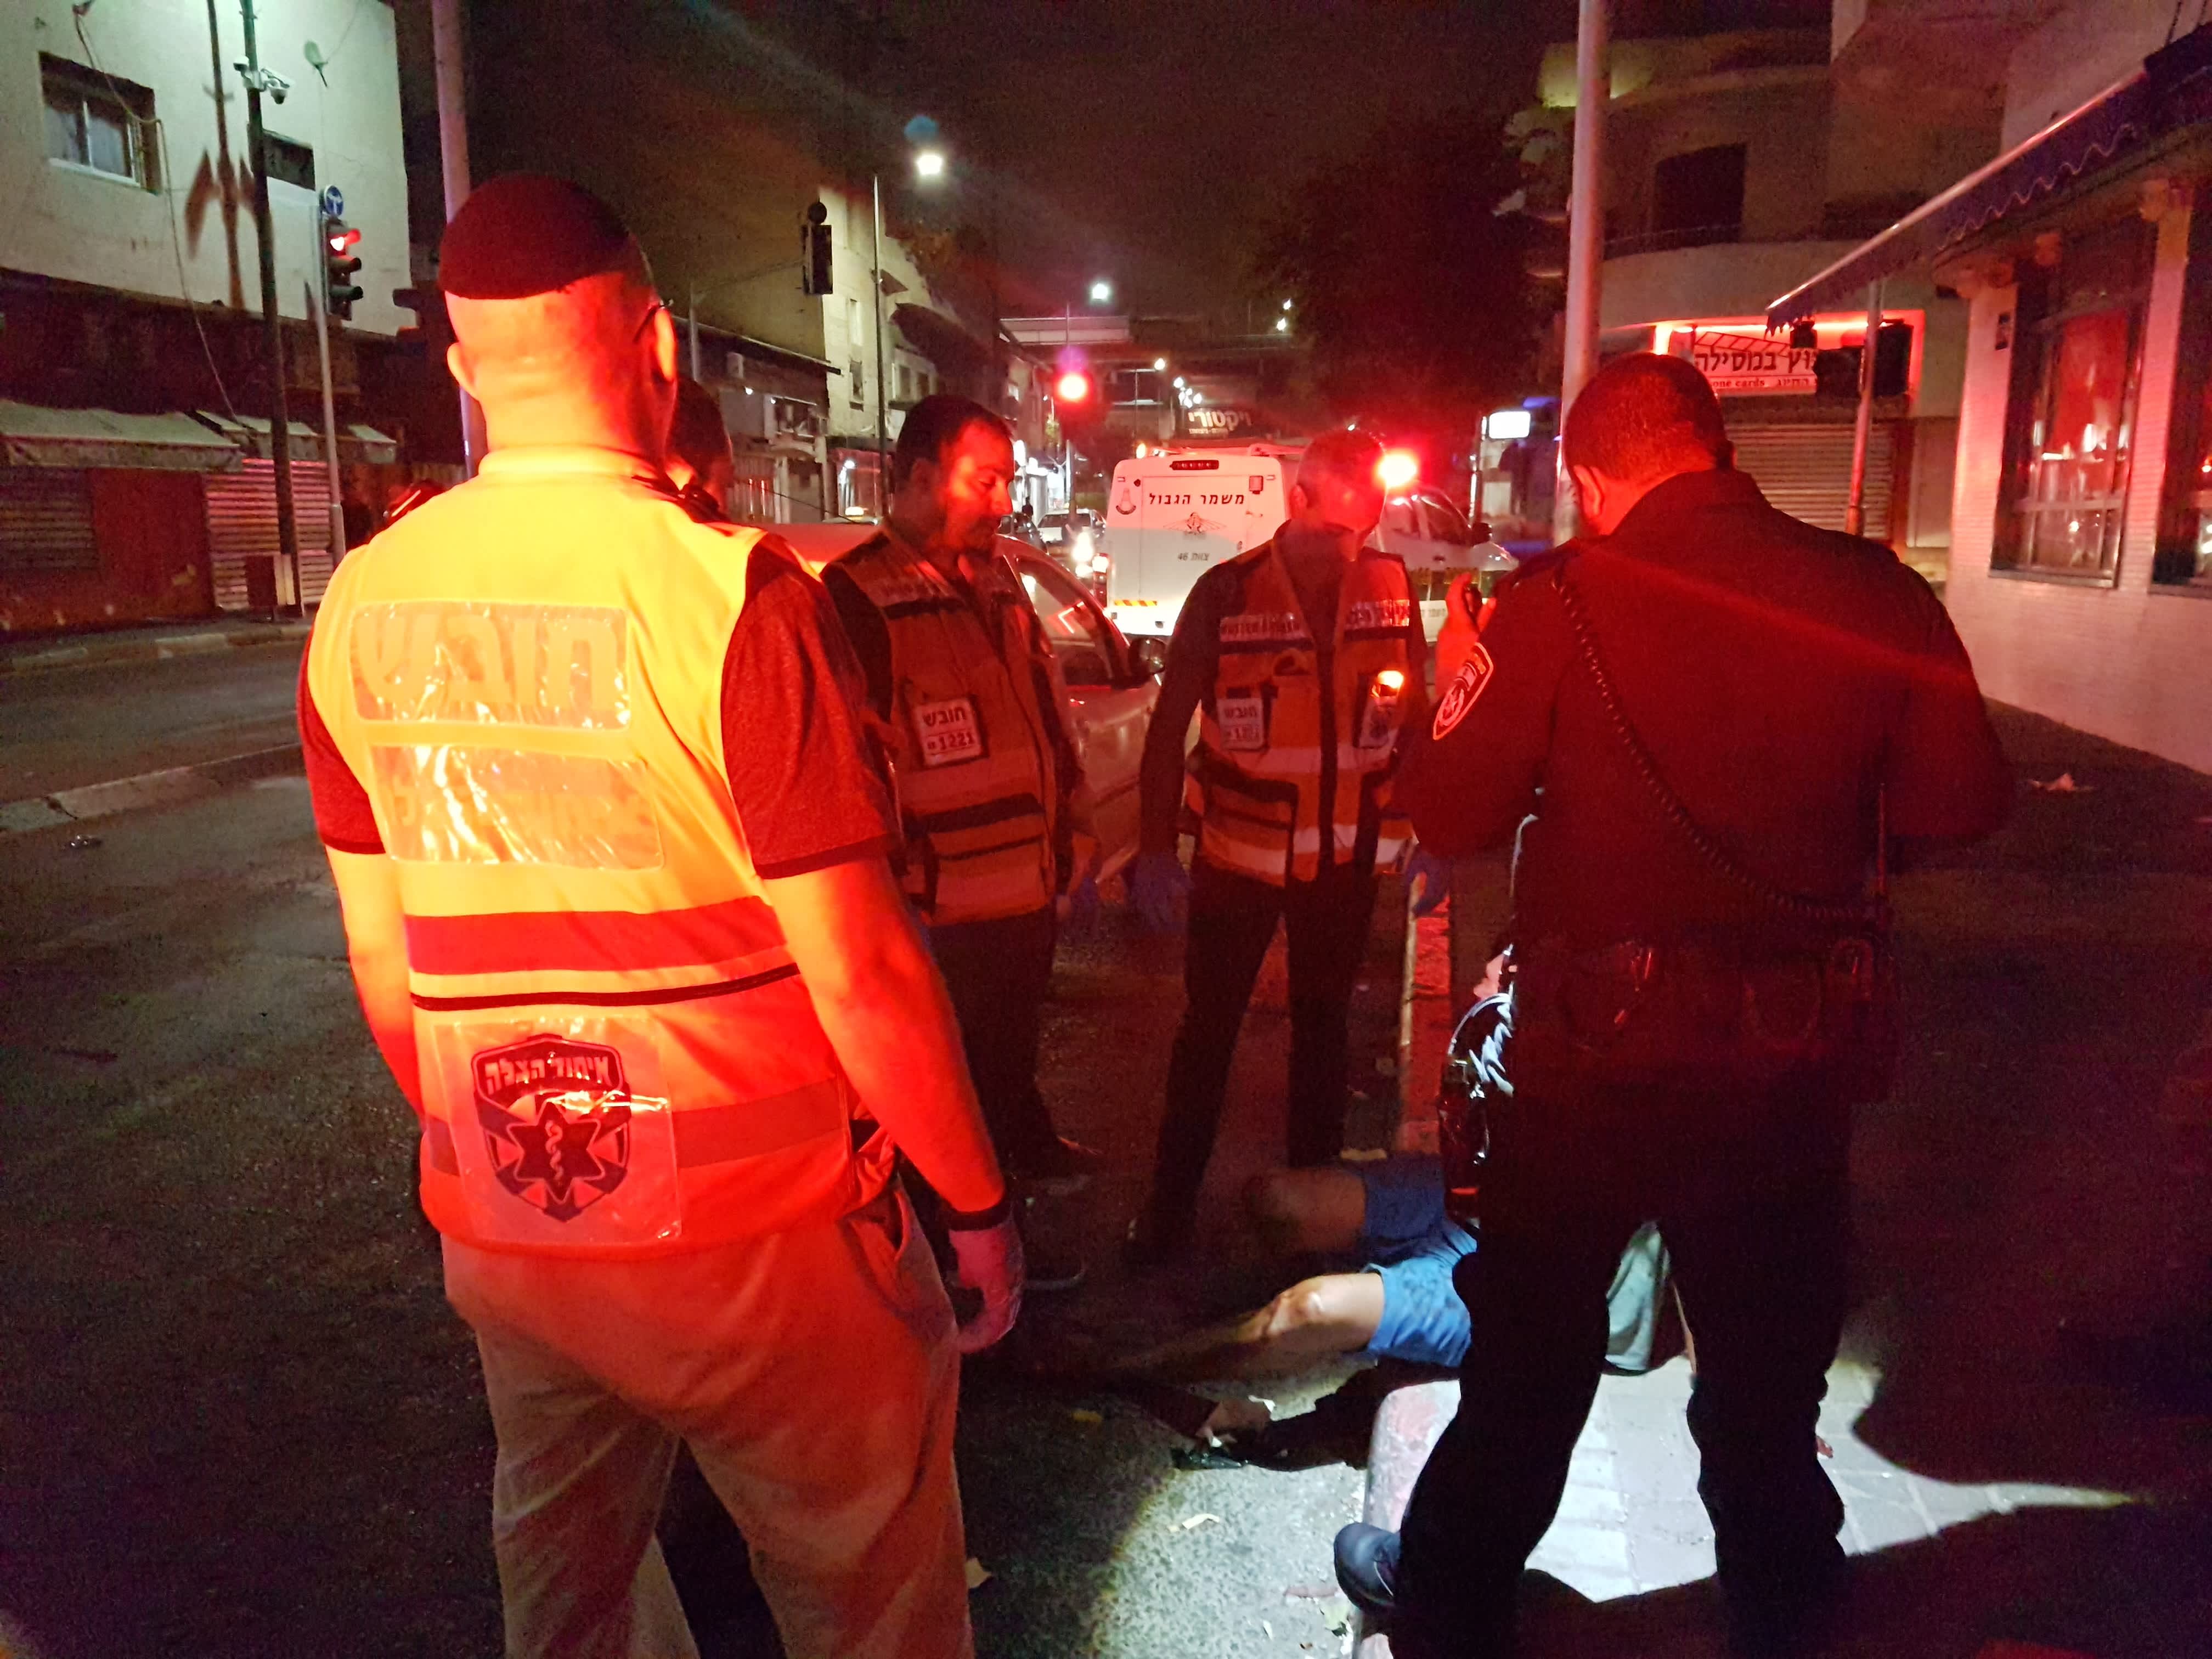 Police officers and United Hatzalah volunteers respond to the scene of a crime (credit: Becky Brothman)